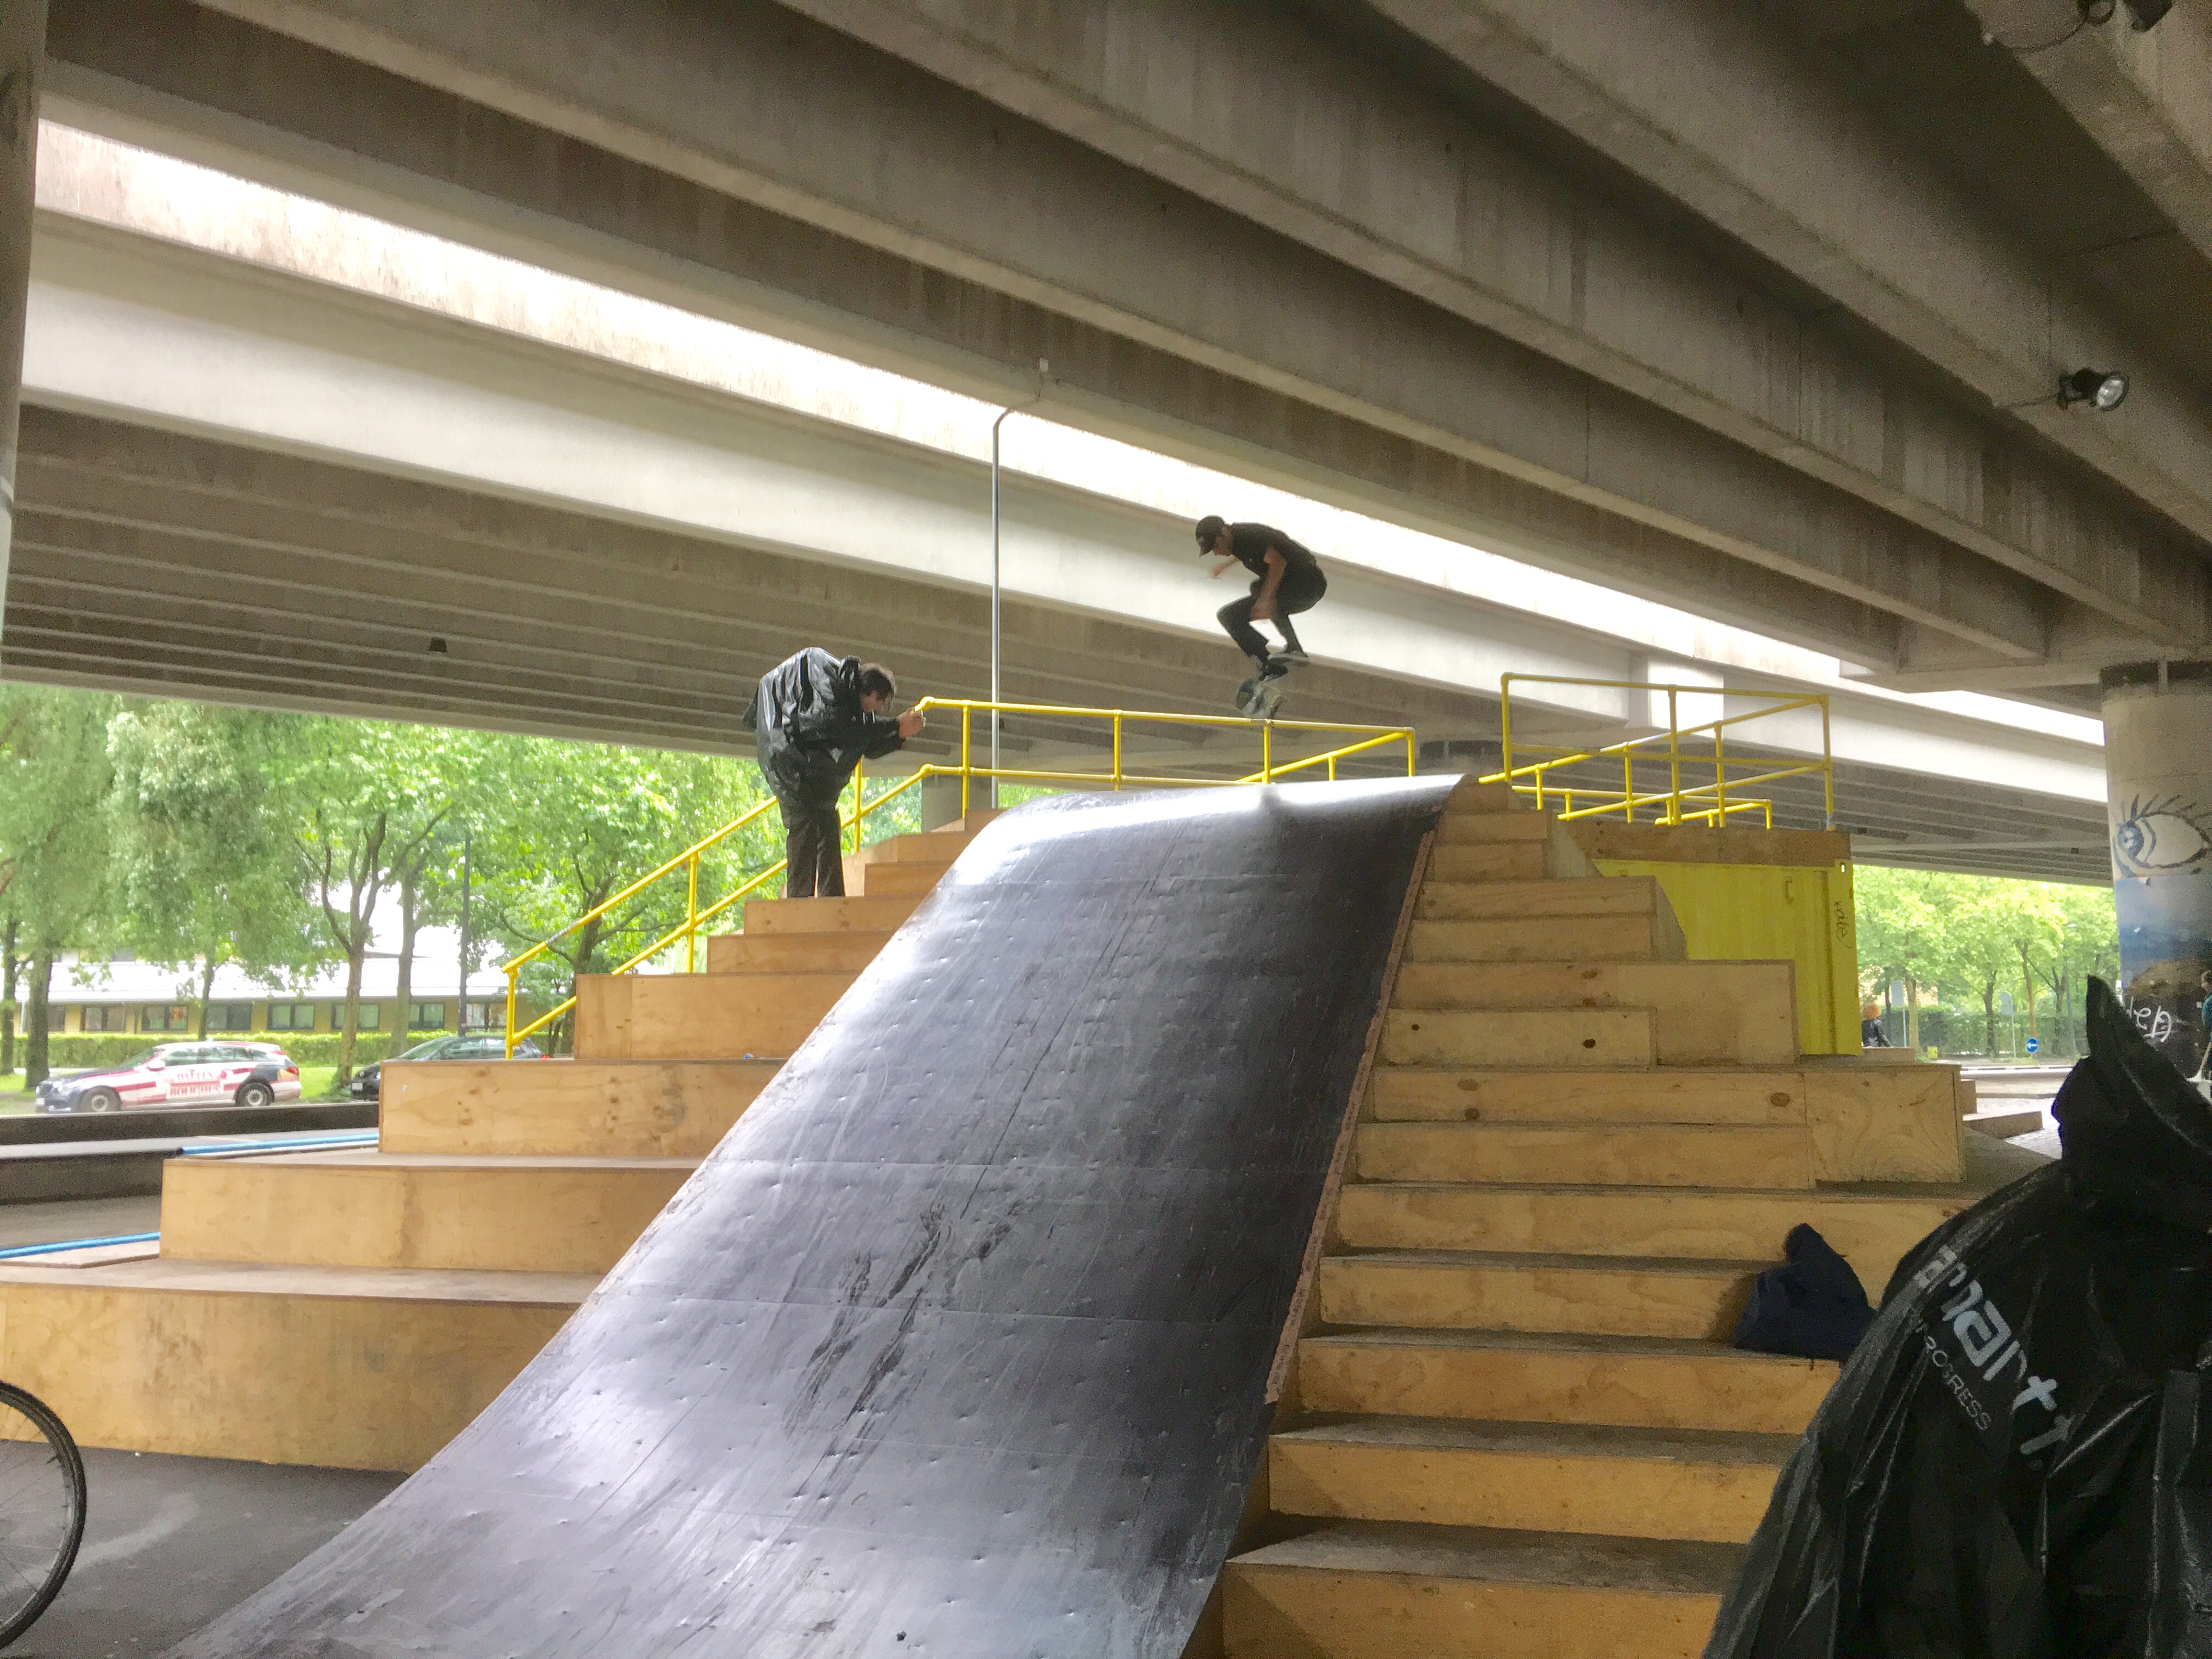 Jimmy kickflips into the bank...during lots of rain